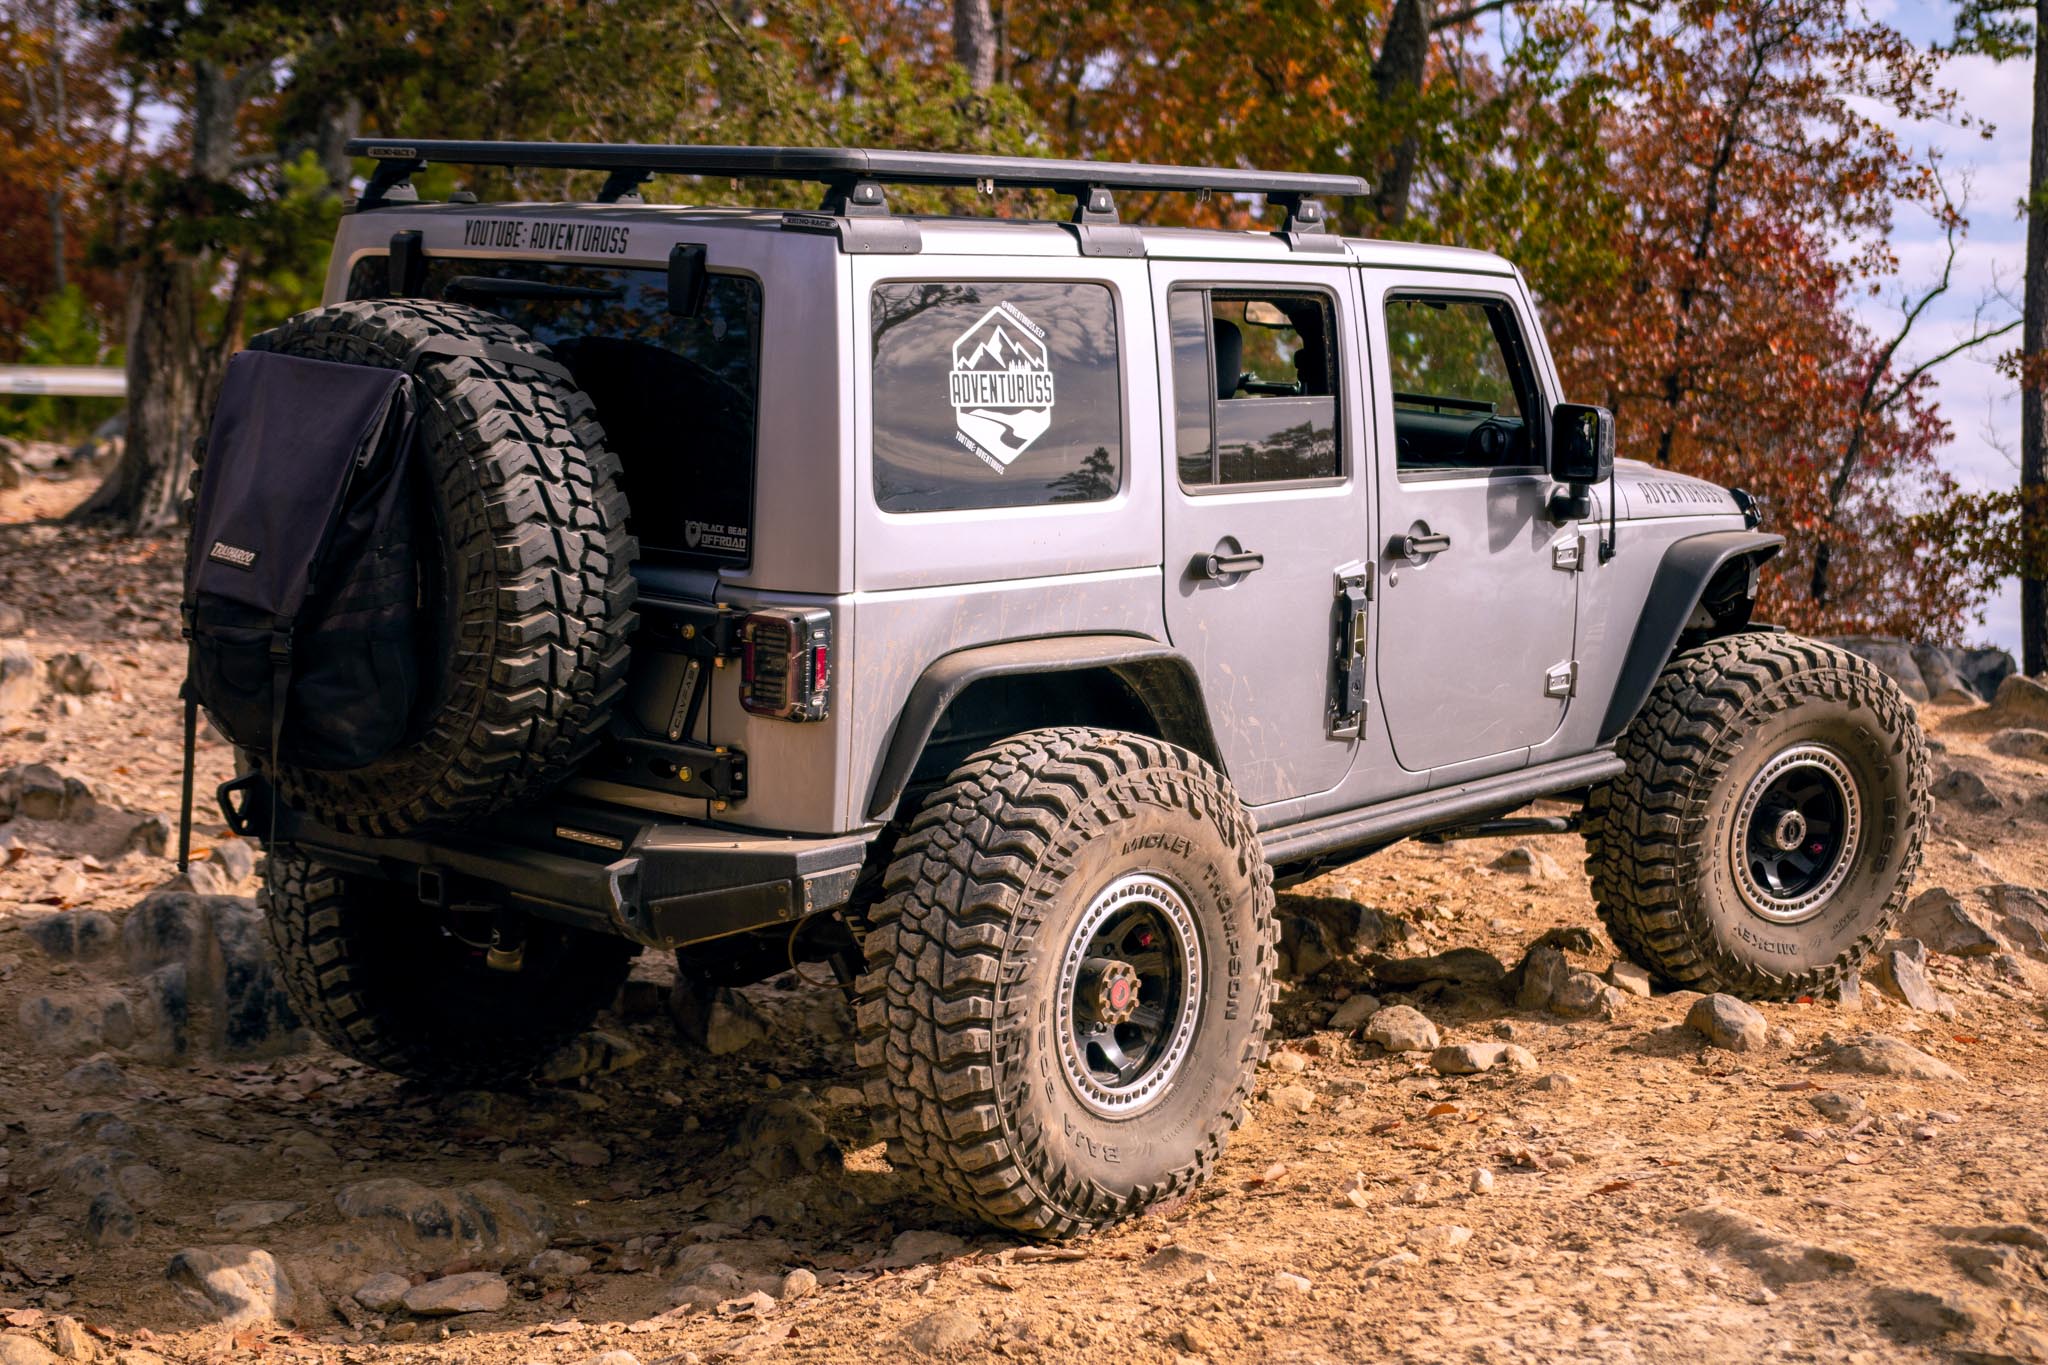 Jeep on 40 tires